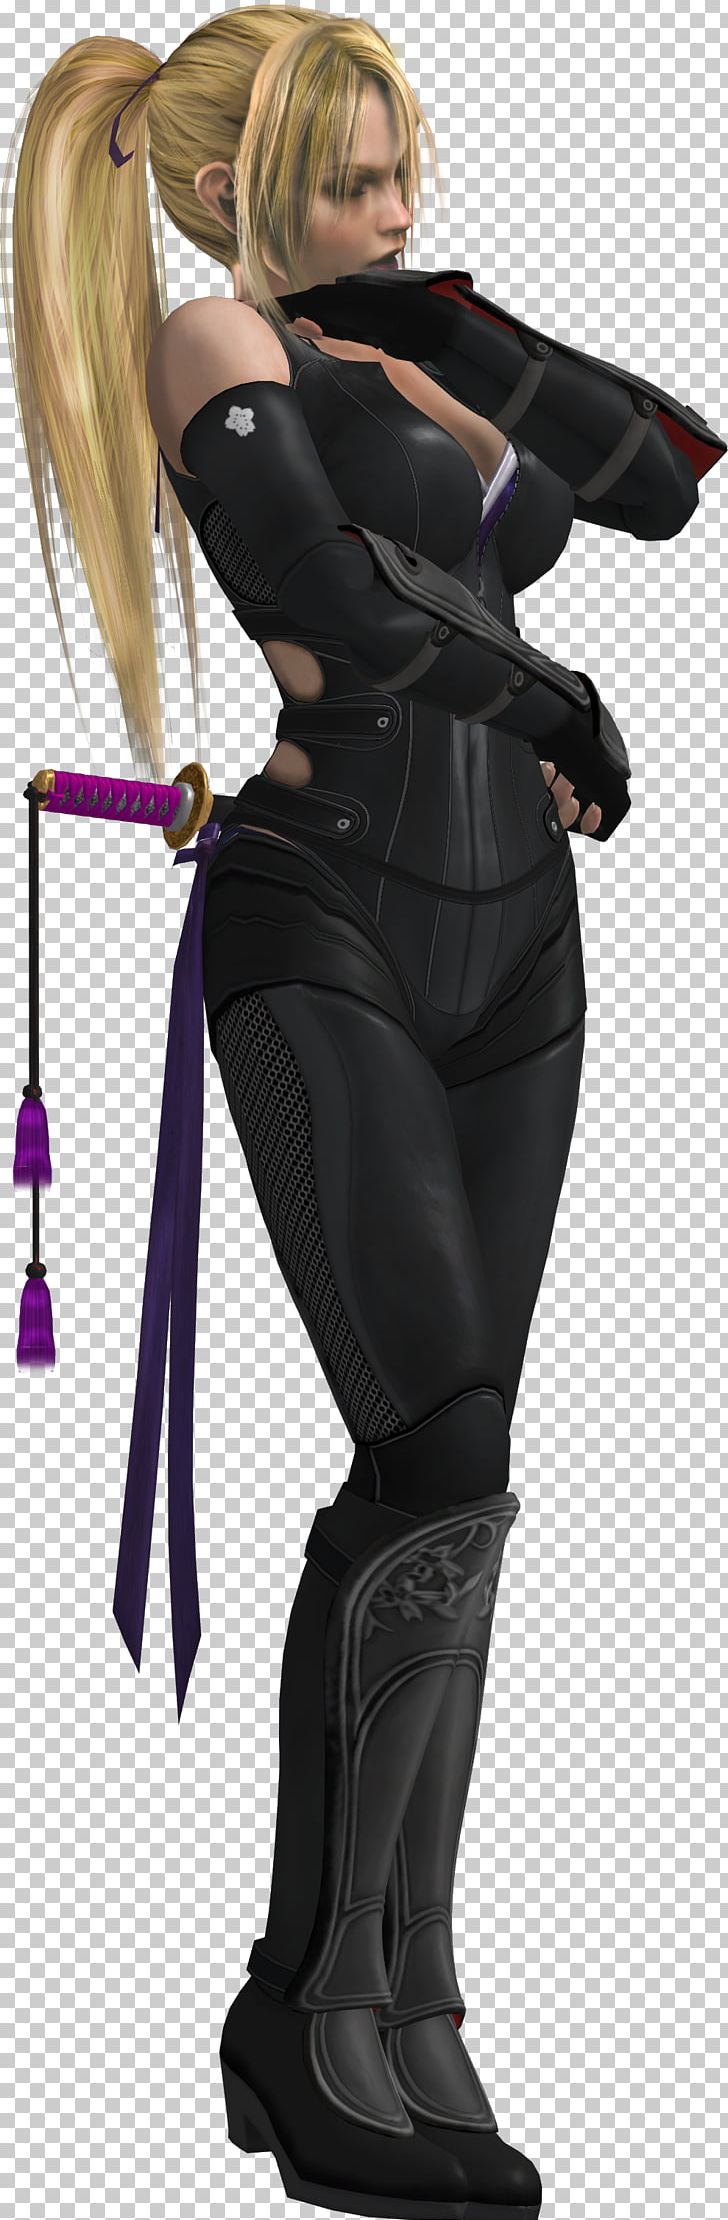 Kasumi Dead Or Alive 5 Last Round Ninja PNG, Clipart, Art, Cartoon, Character, Costume, Dead Or Alive Free PNG Download